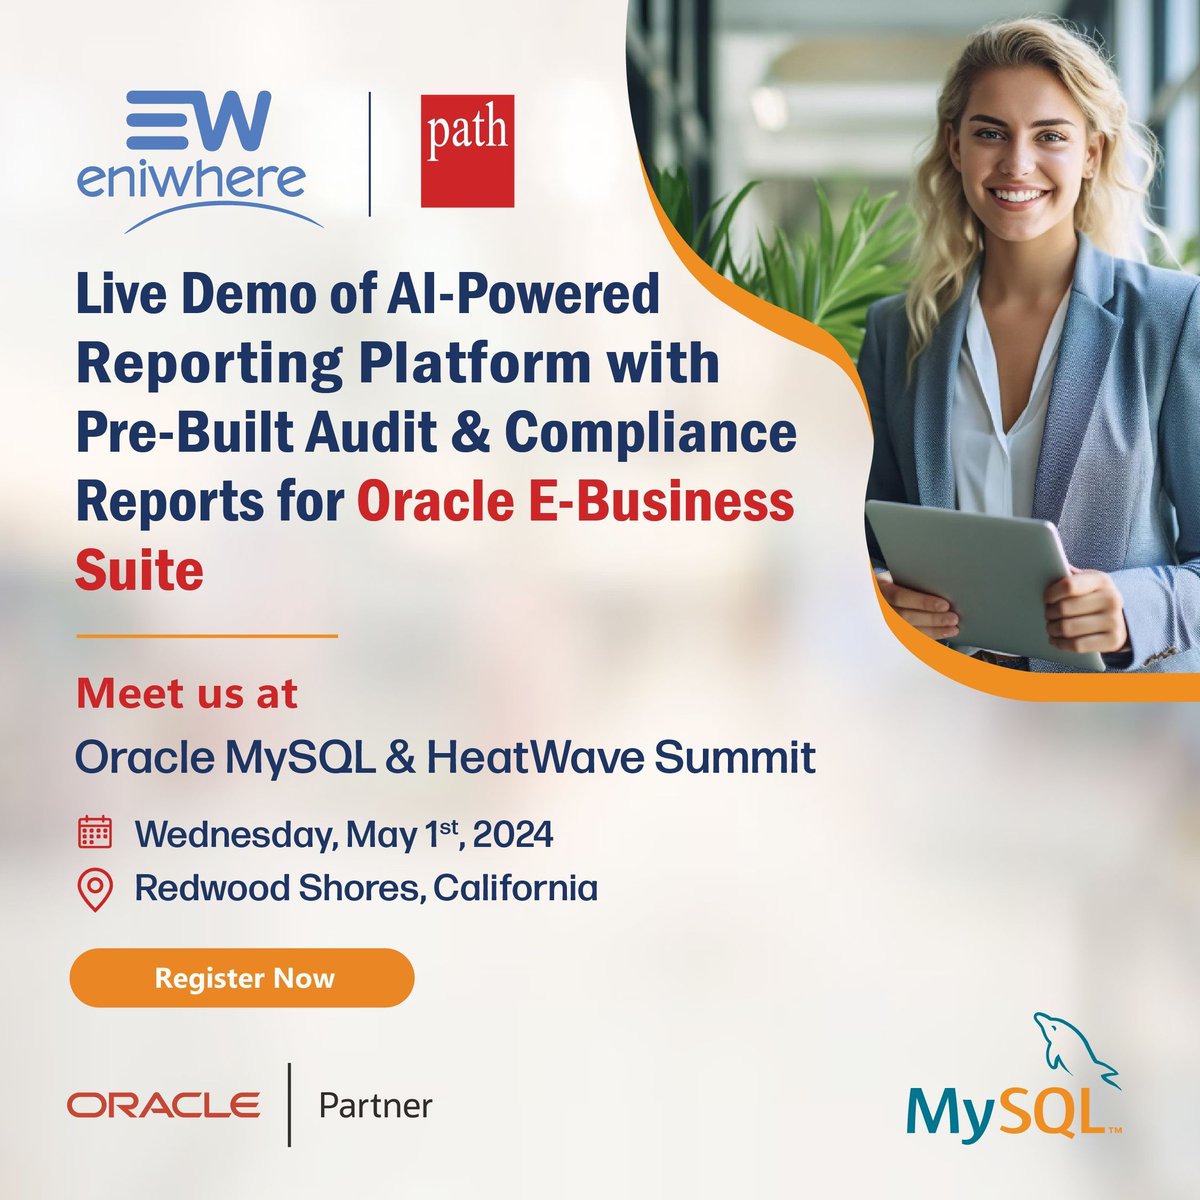 Excited to be a #partner at #OracleMySQL hosted MySQL & #HeatWaveSummit 2024! Join #Path for a glimpse into innovation at our AI-powered #ComplianceReportingPlatform eniwhere. Don't miss out - #registernow for free! -  buff.ly/3Web8gq 

#MySQLSummit #TechEvent #OracleEBS